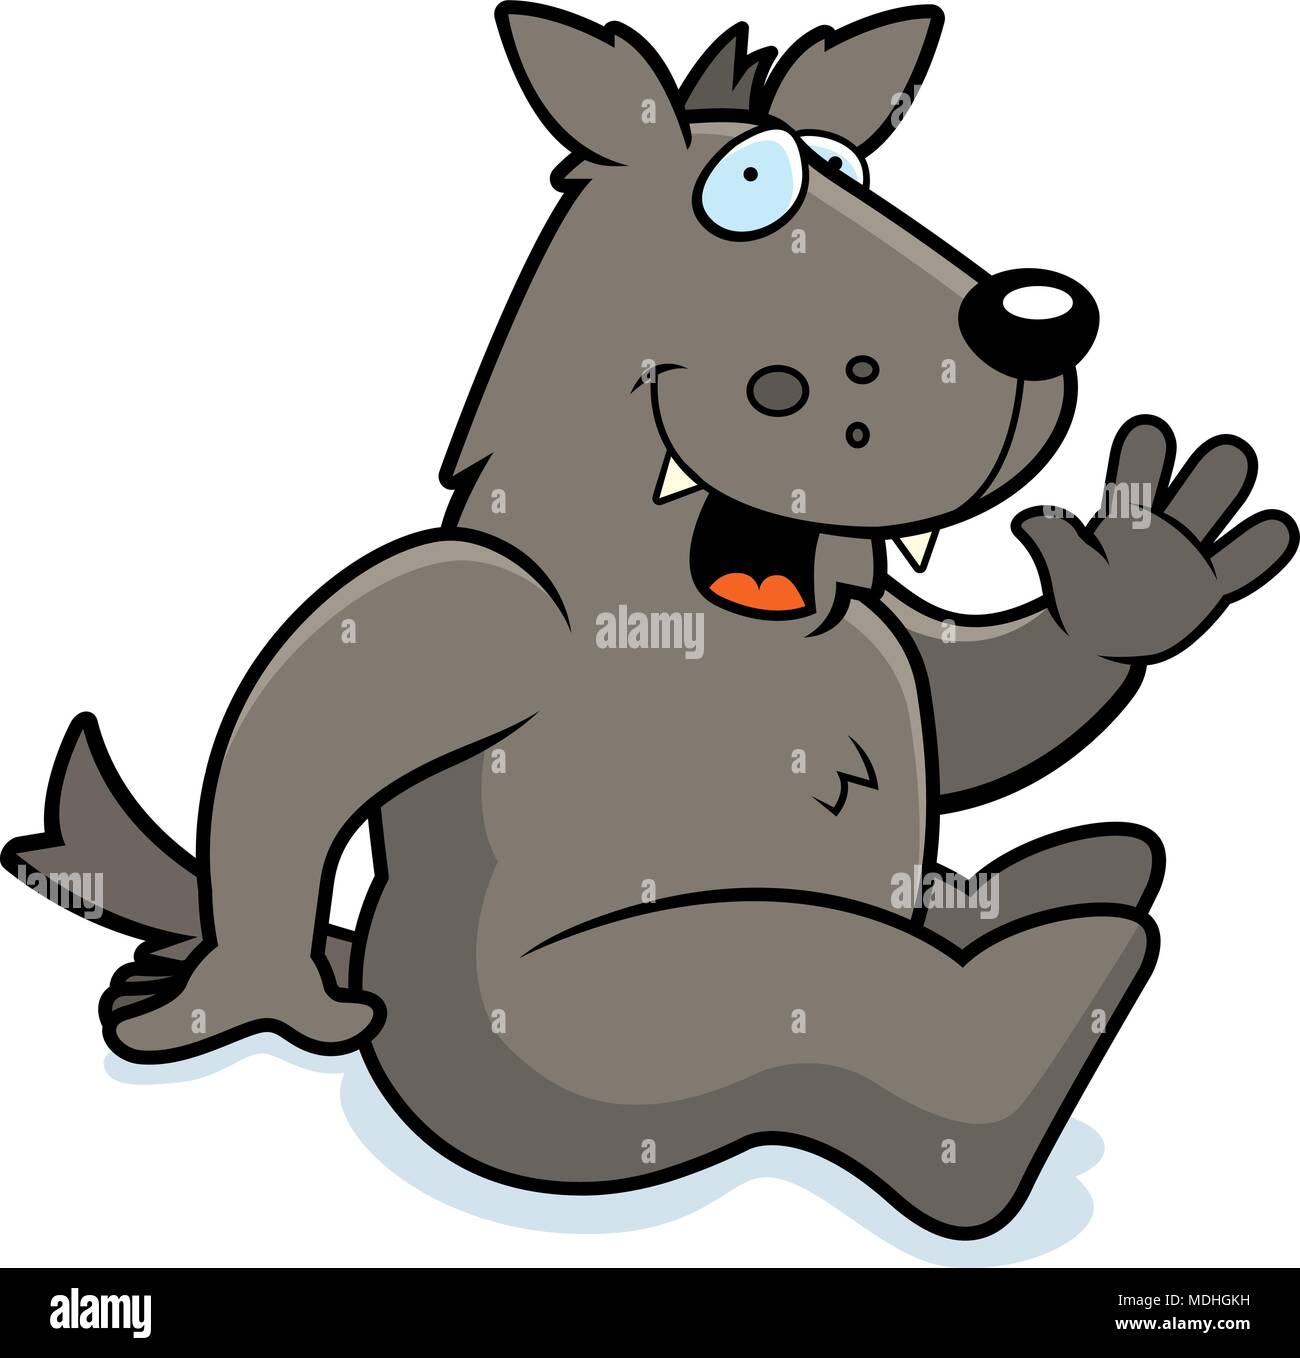 A cartoon illustration of a wolf sitting down. Stock Vector